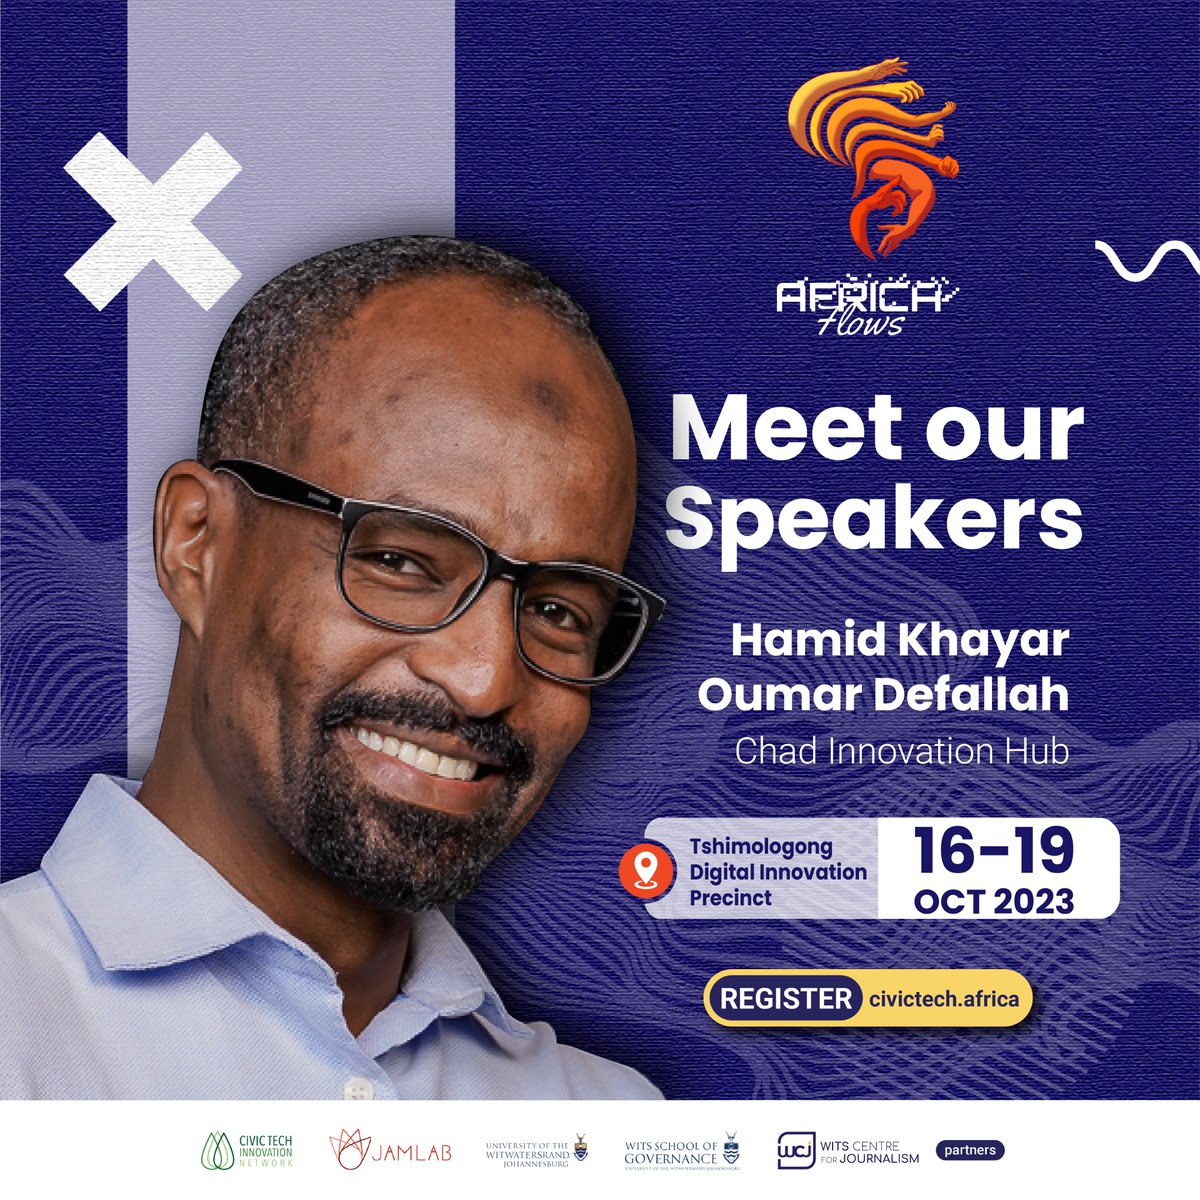 @khayarion is one of the speakers this year at CTIF and Jamfest 2023!

Khayar is the founder & and CEO of @ChadInnov a Tech Hub based in N'Djamena, allowing people to incubate their ideas and turn them into startups.

Get your tickets here: t.ly/XnT45

#AfricaFlows